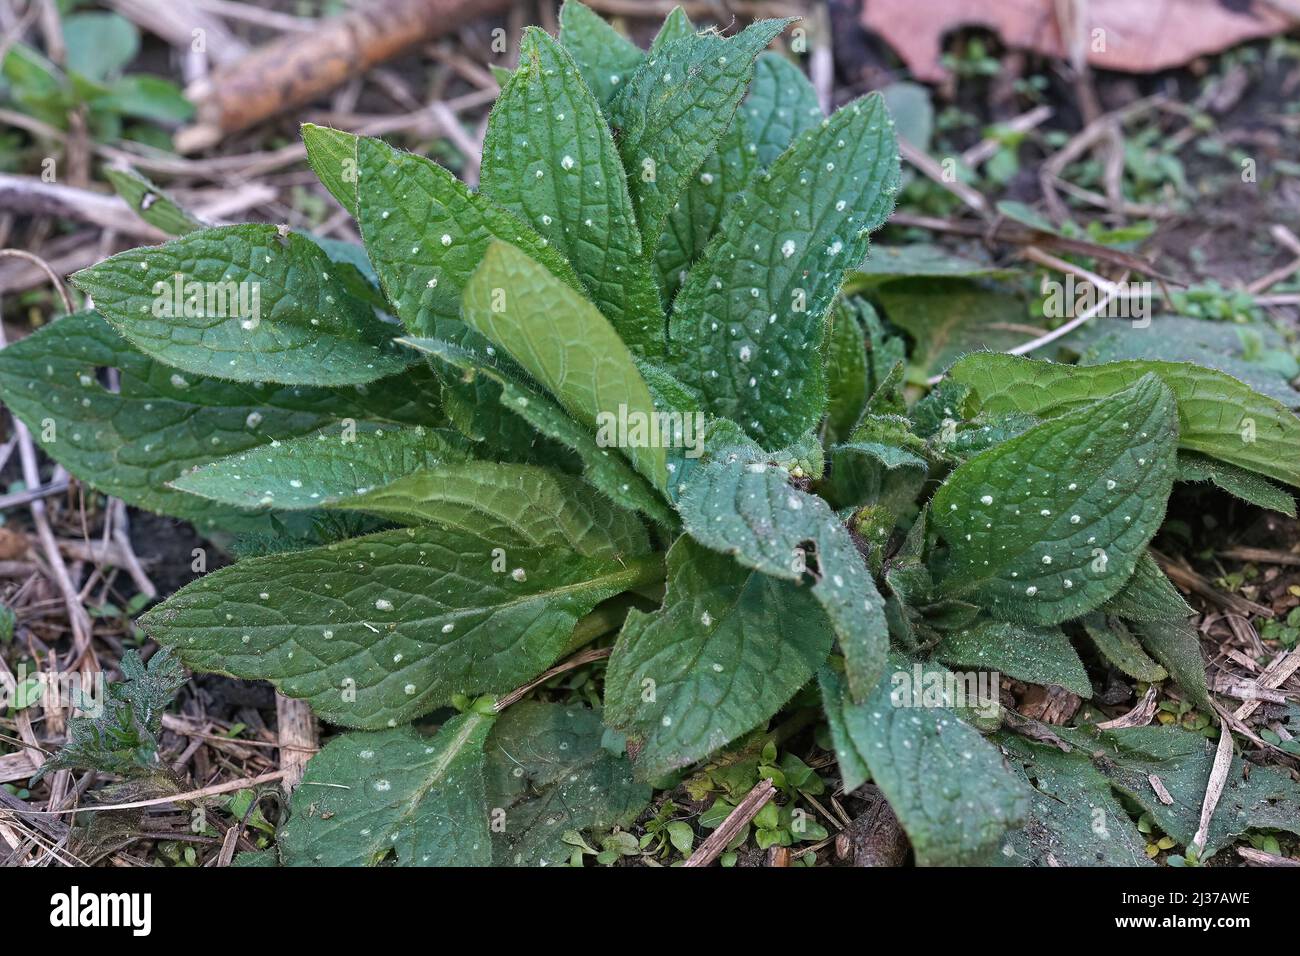 Closeup on a emerging white speckled leafs of Green alkanet, Pentaglottis sempervirens, in the garden in the springtime Stock Photo